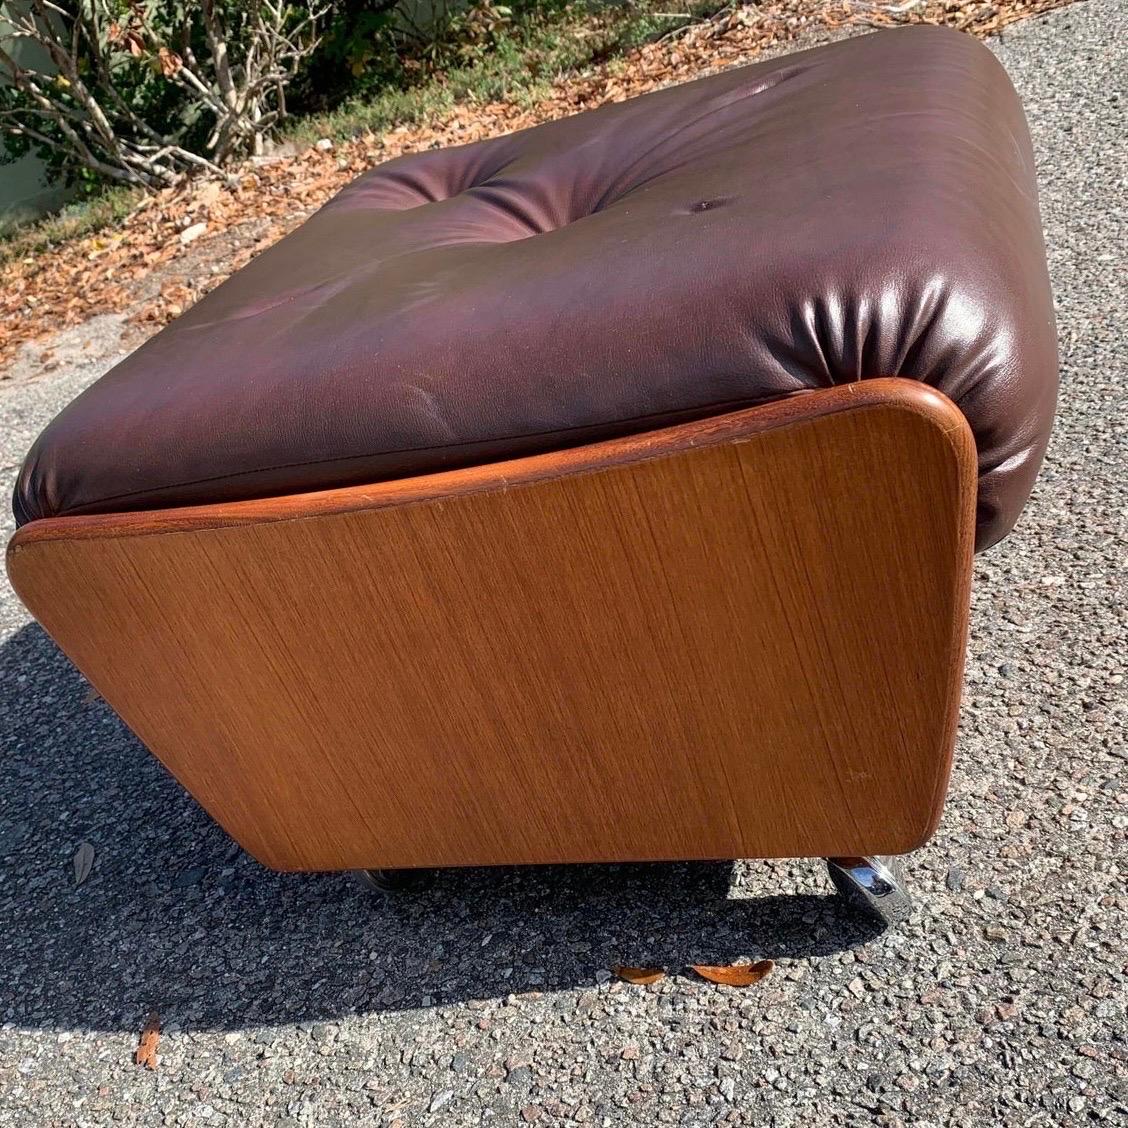 Vintage mid century G plan Saddleback Footstool on castors. Original upholstery in black vinyl with float buttons.

Versatile, stunning shape and fits two pairs of feet or useful as an extra seat!

